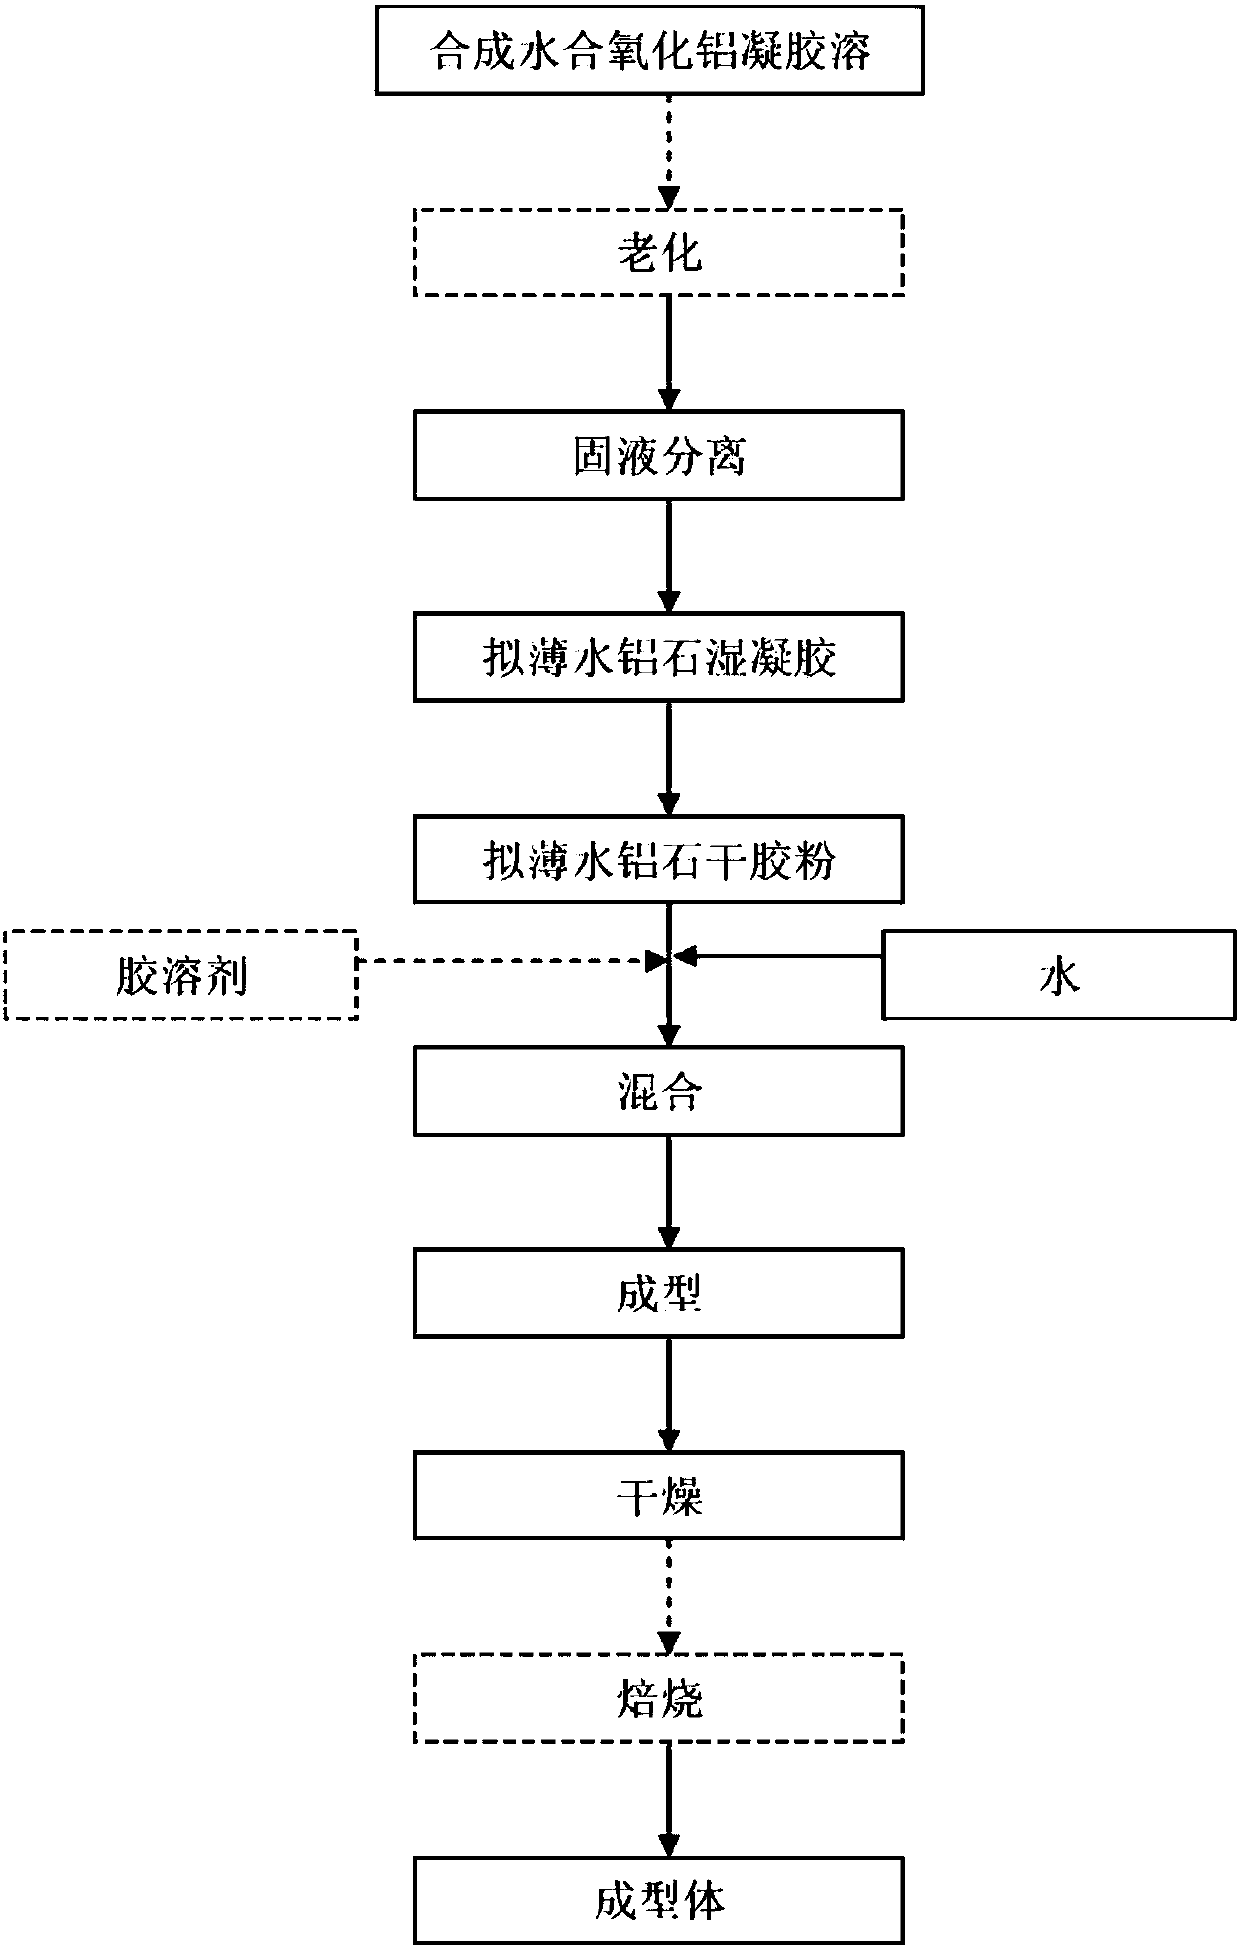 Catalyst with hydrogenation catalysis effect, preparation method and application of catalyst and heavy oil hydrogenation deasphaltenizing method